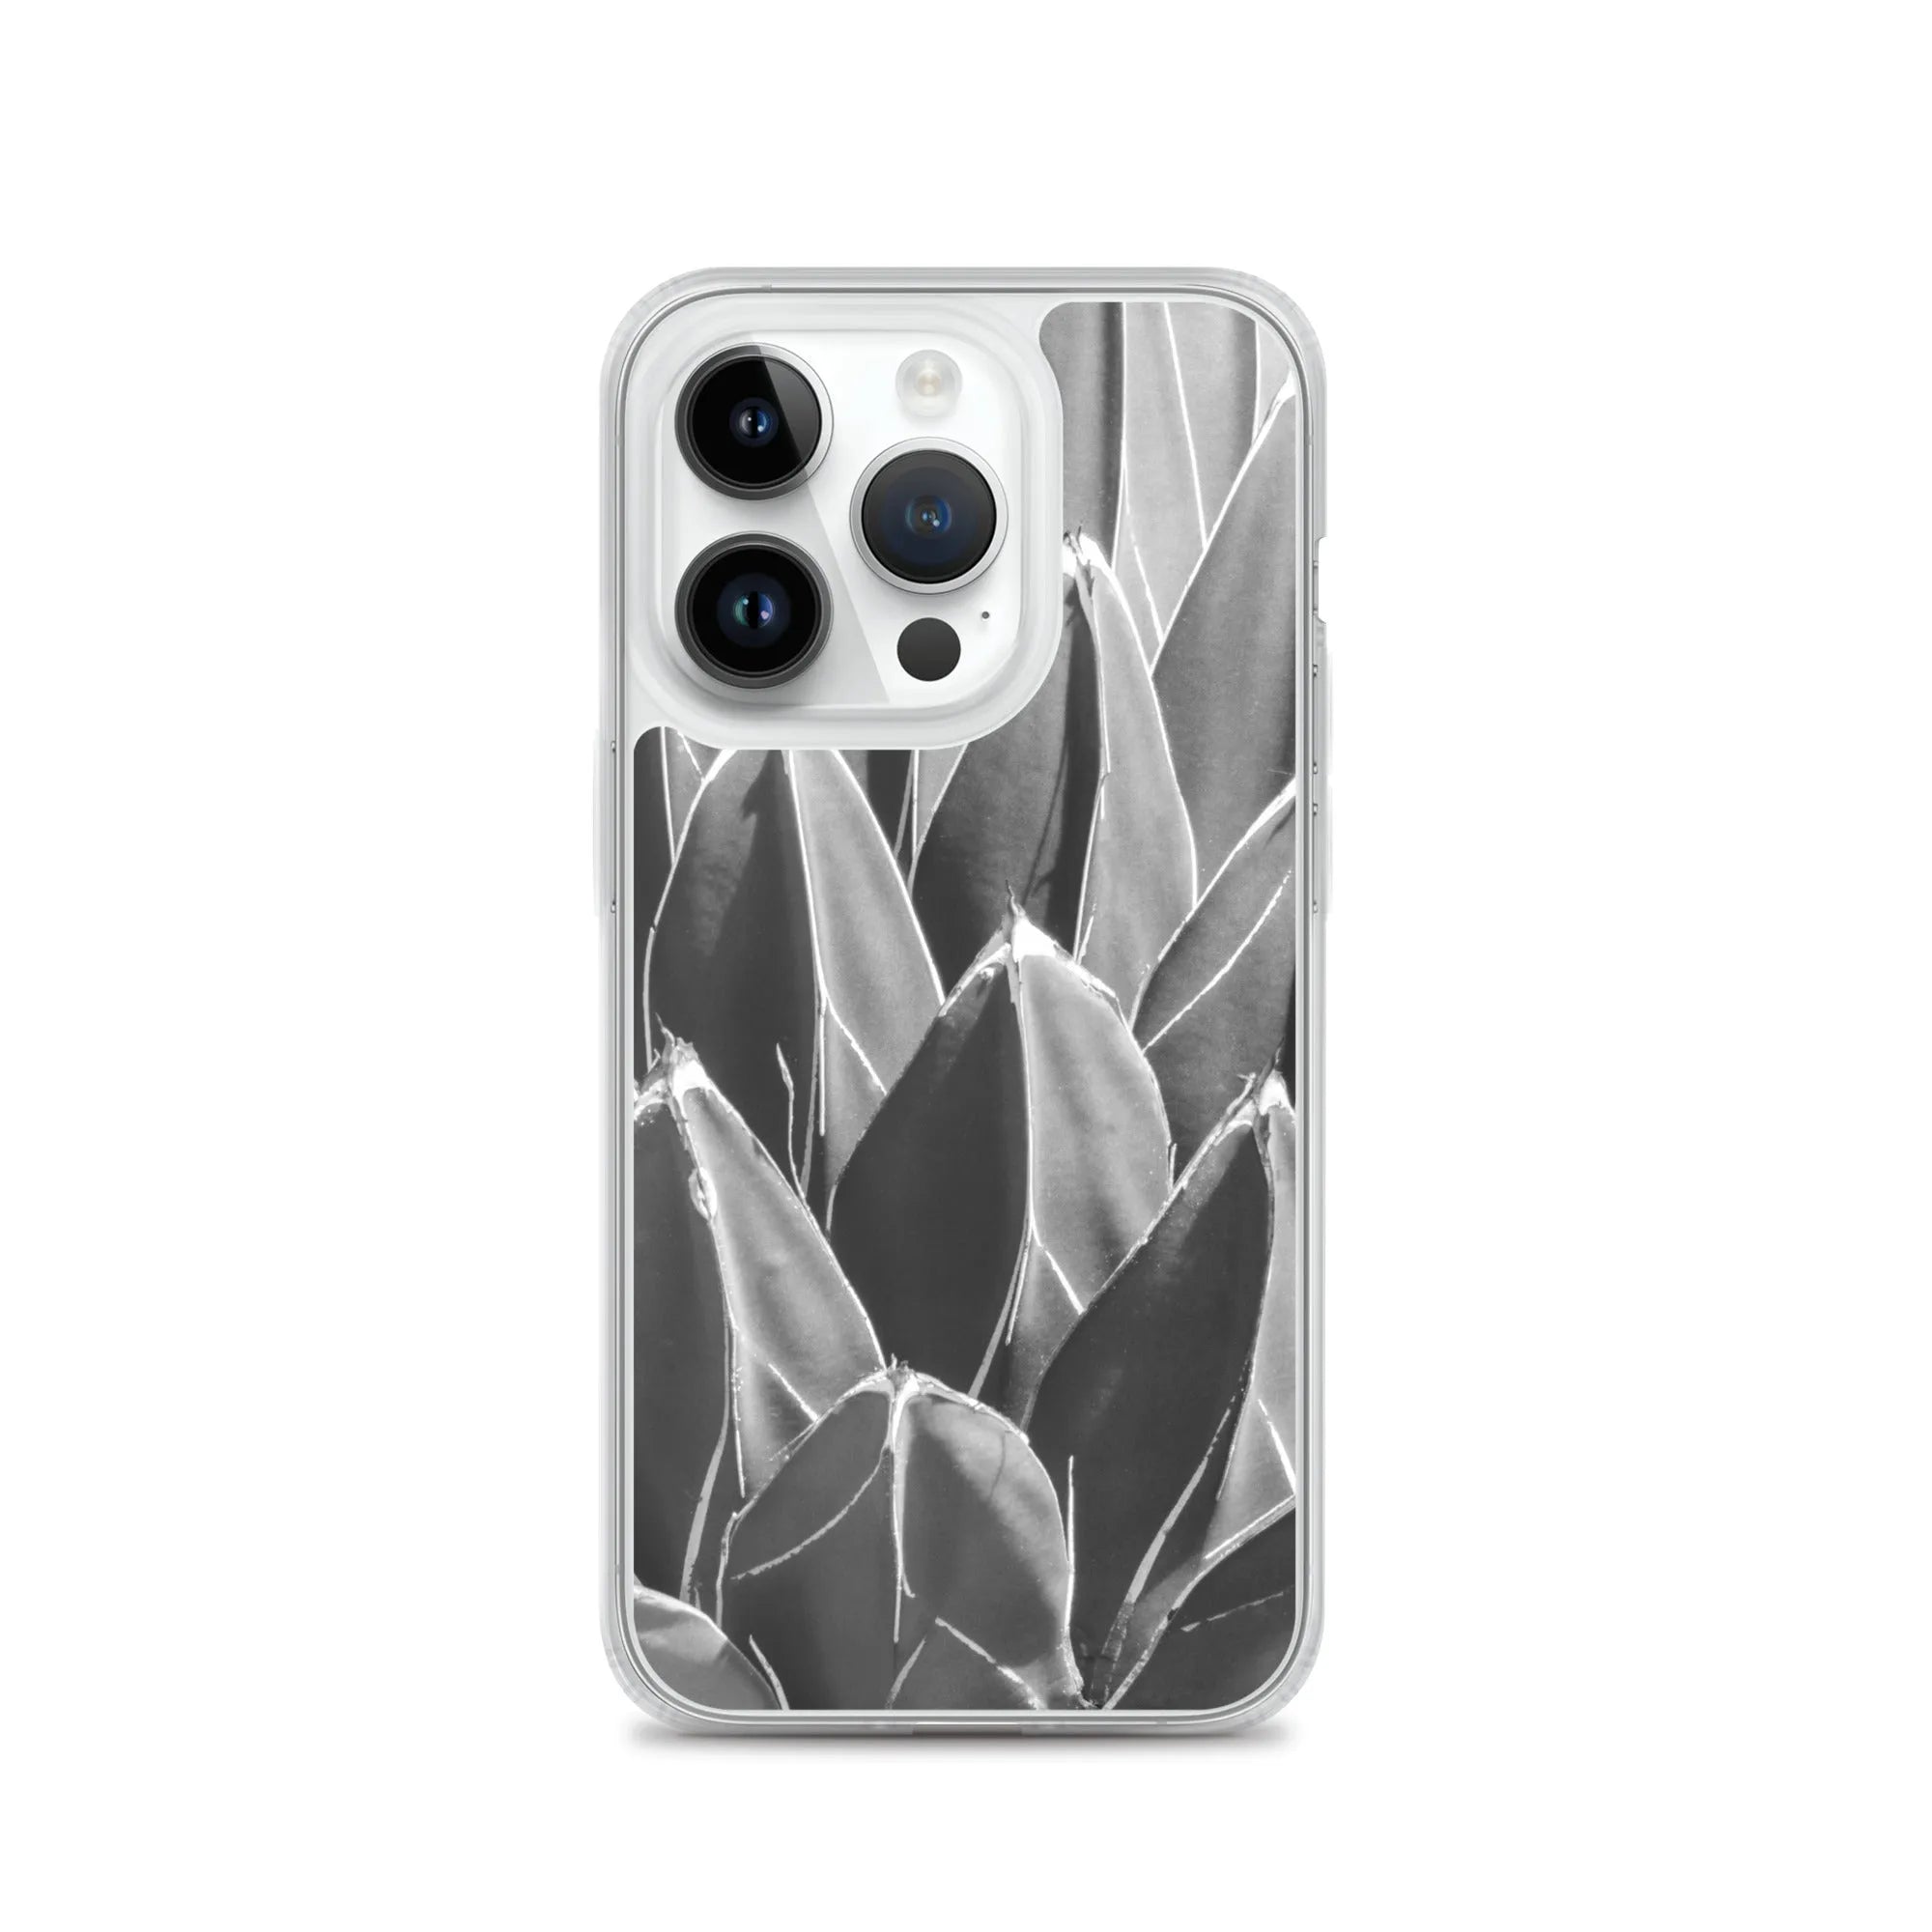 Decked Out Botanical Art Iphone Case - black And White - Iphone 14 Pro - Mobile Phone Cases - Aesthetic Art